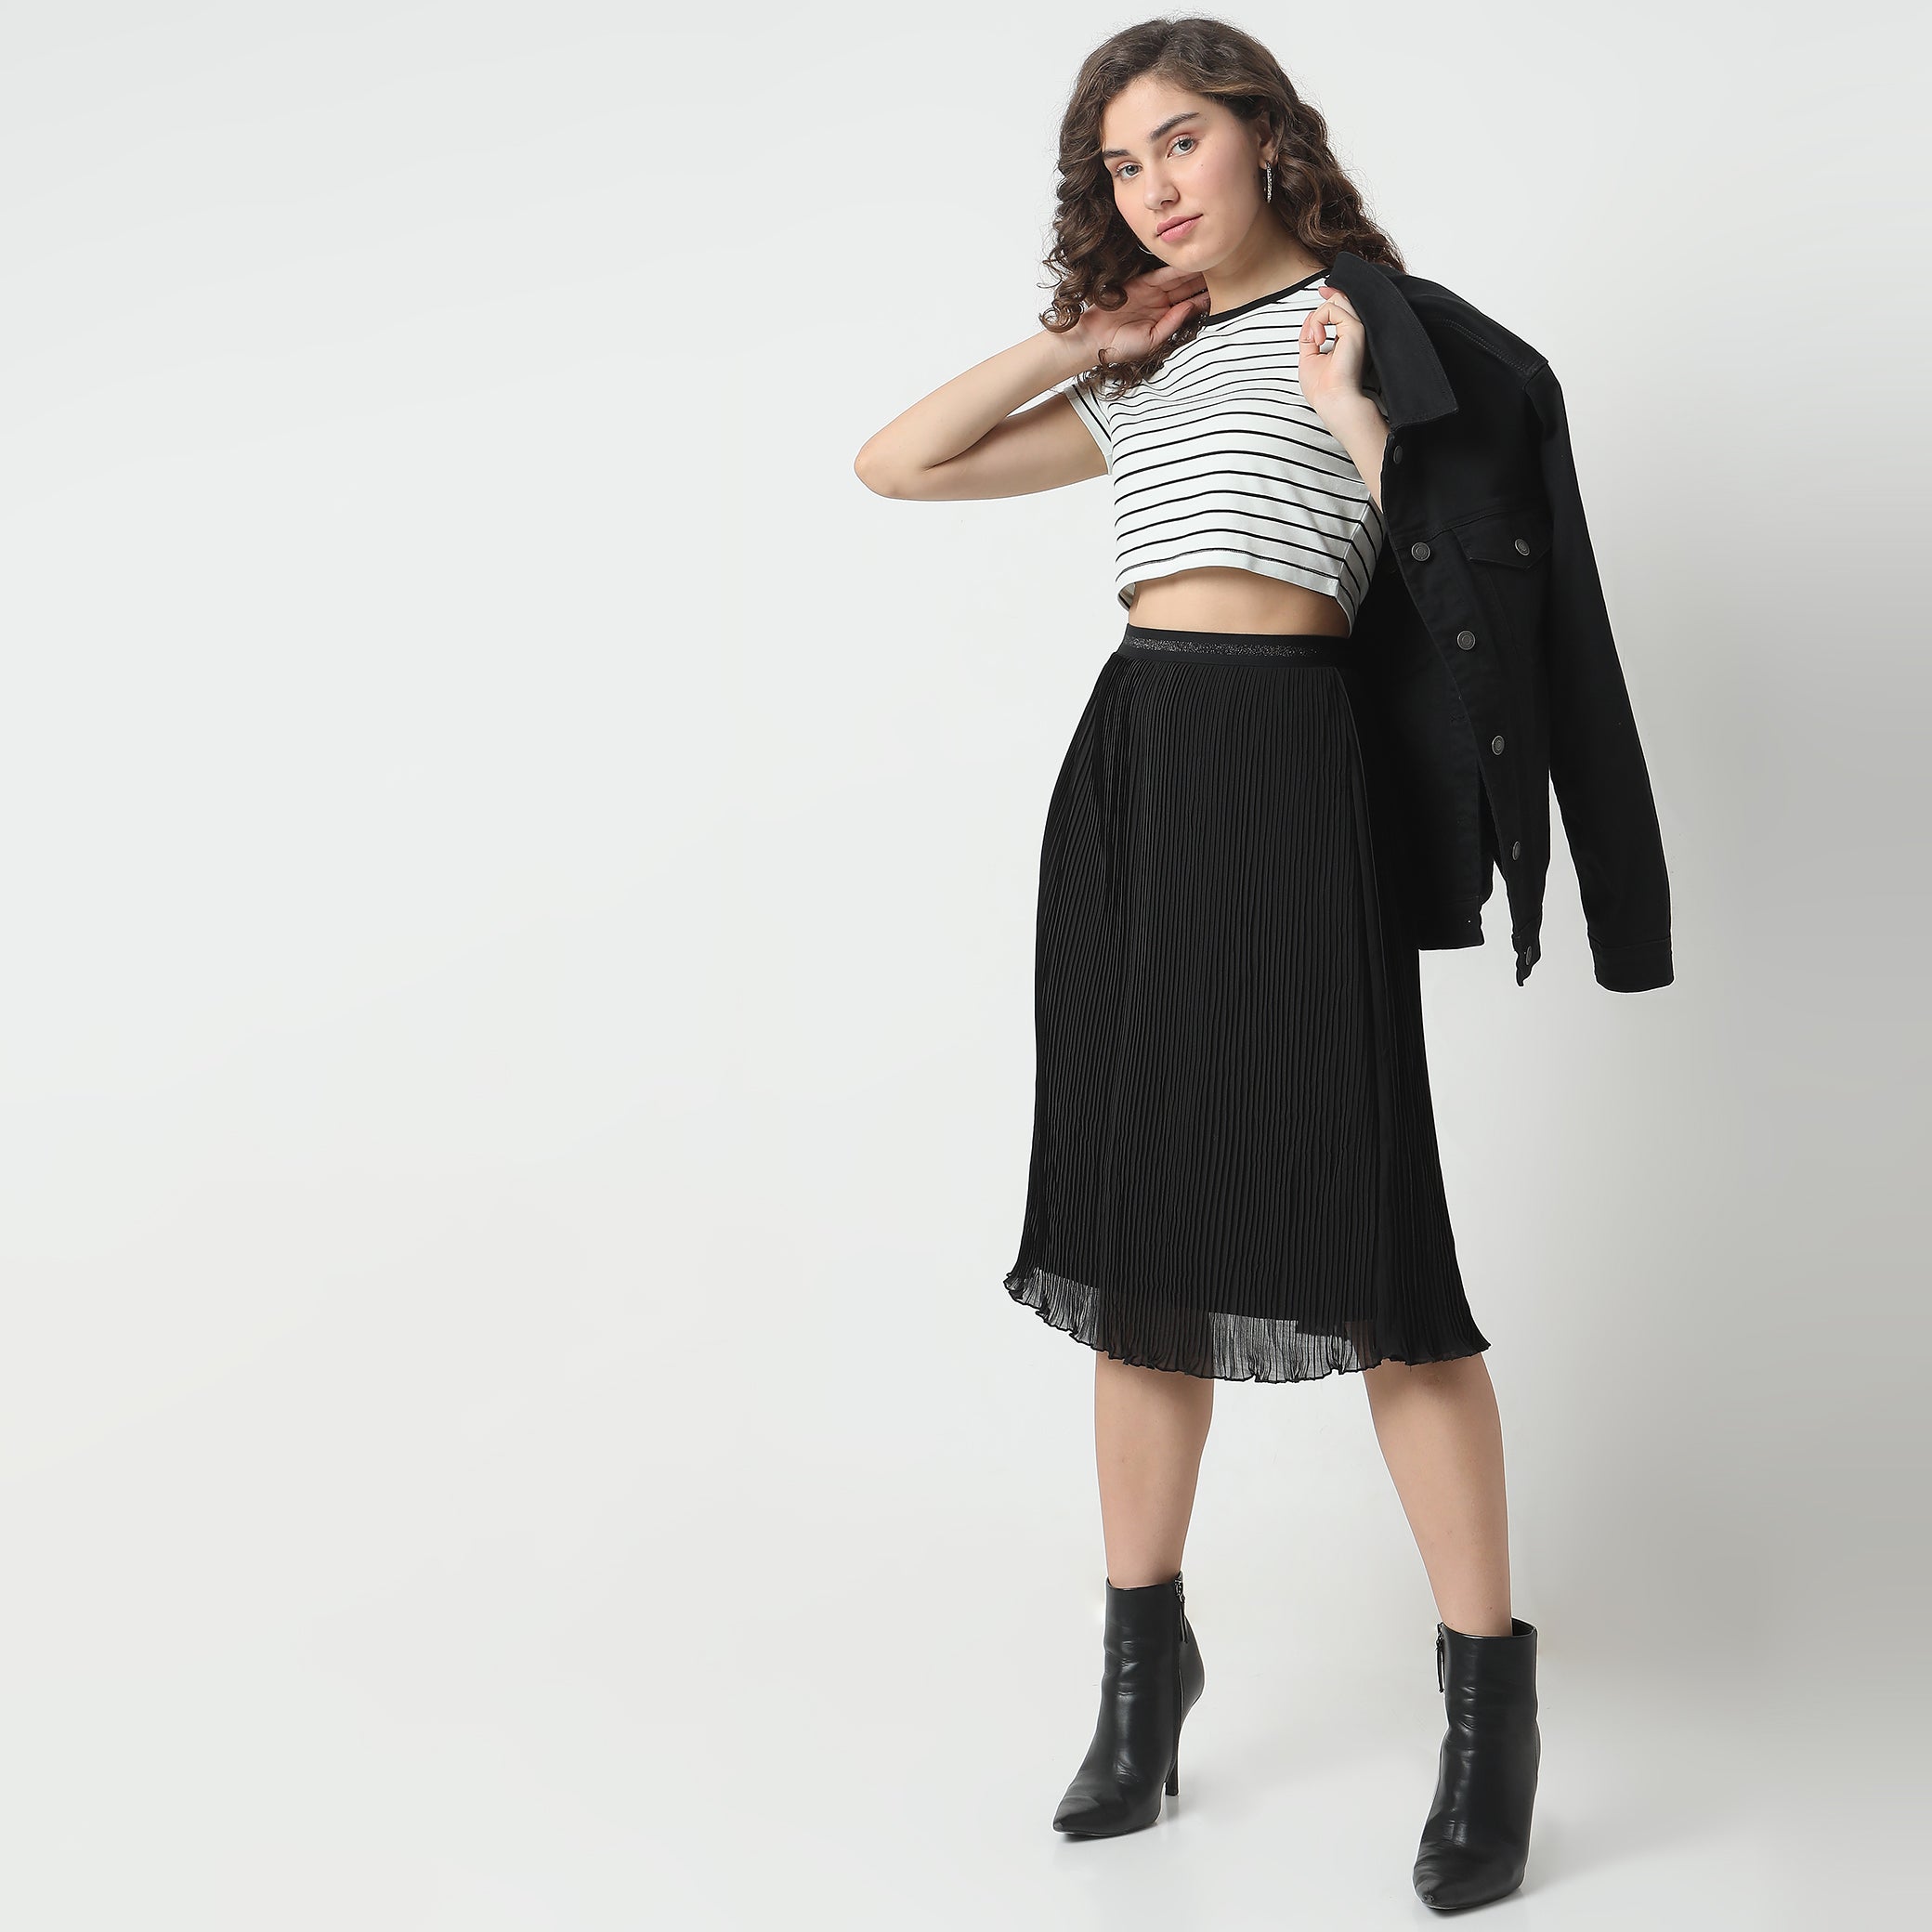 Regular Fit Striped Mid Rise Skirts